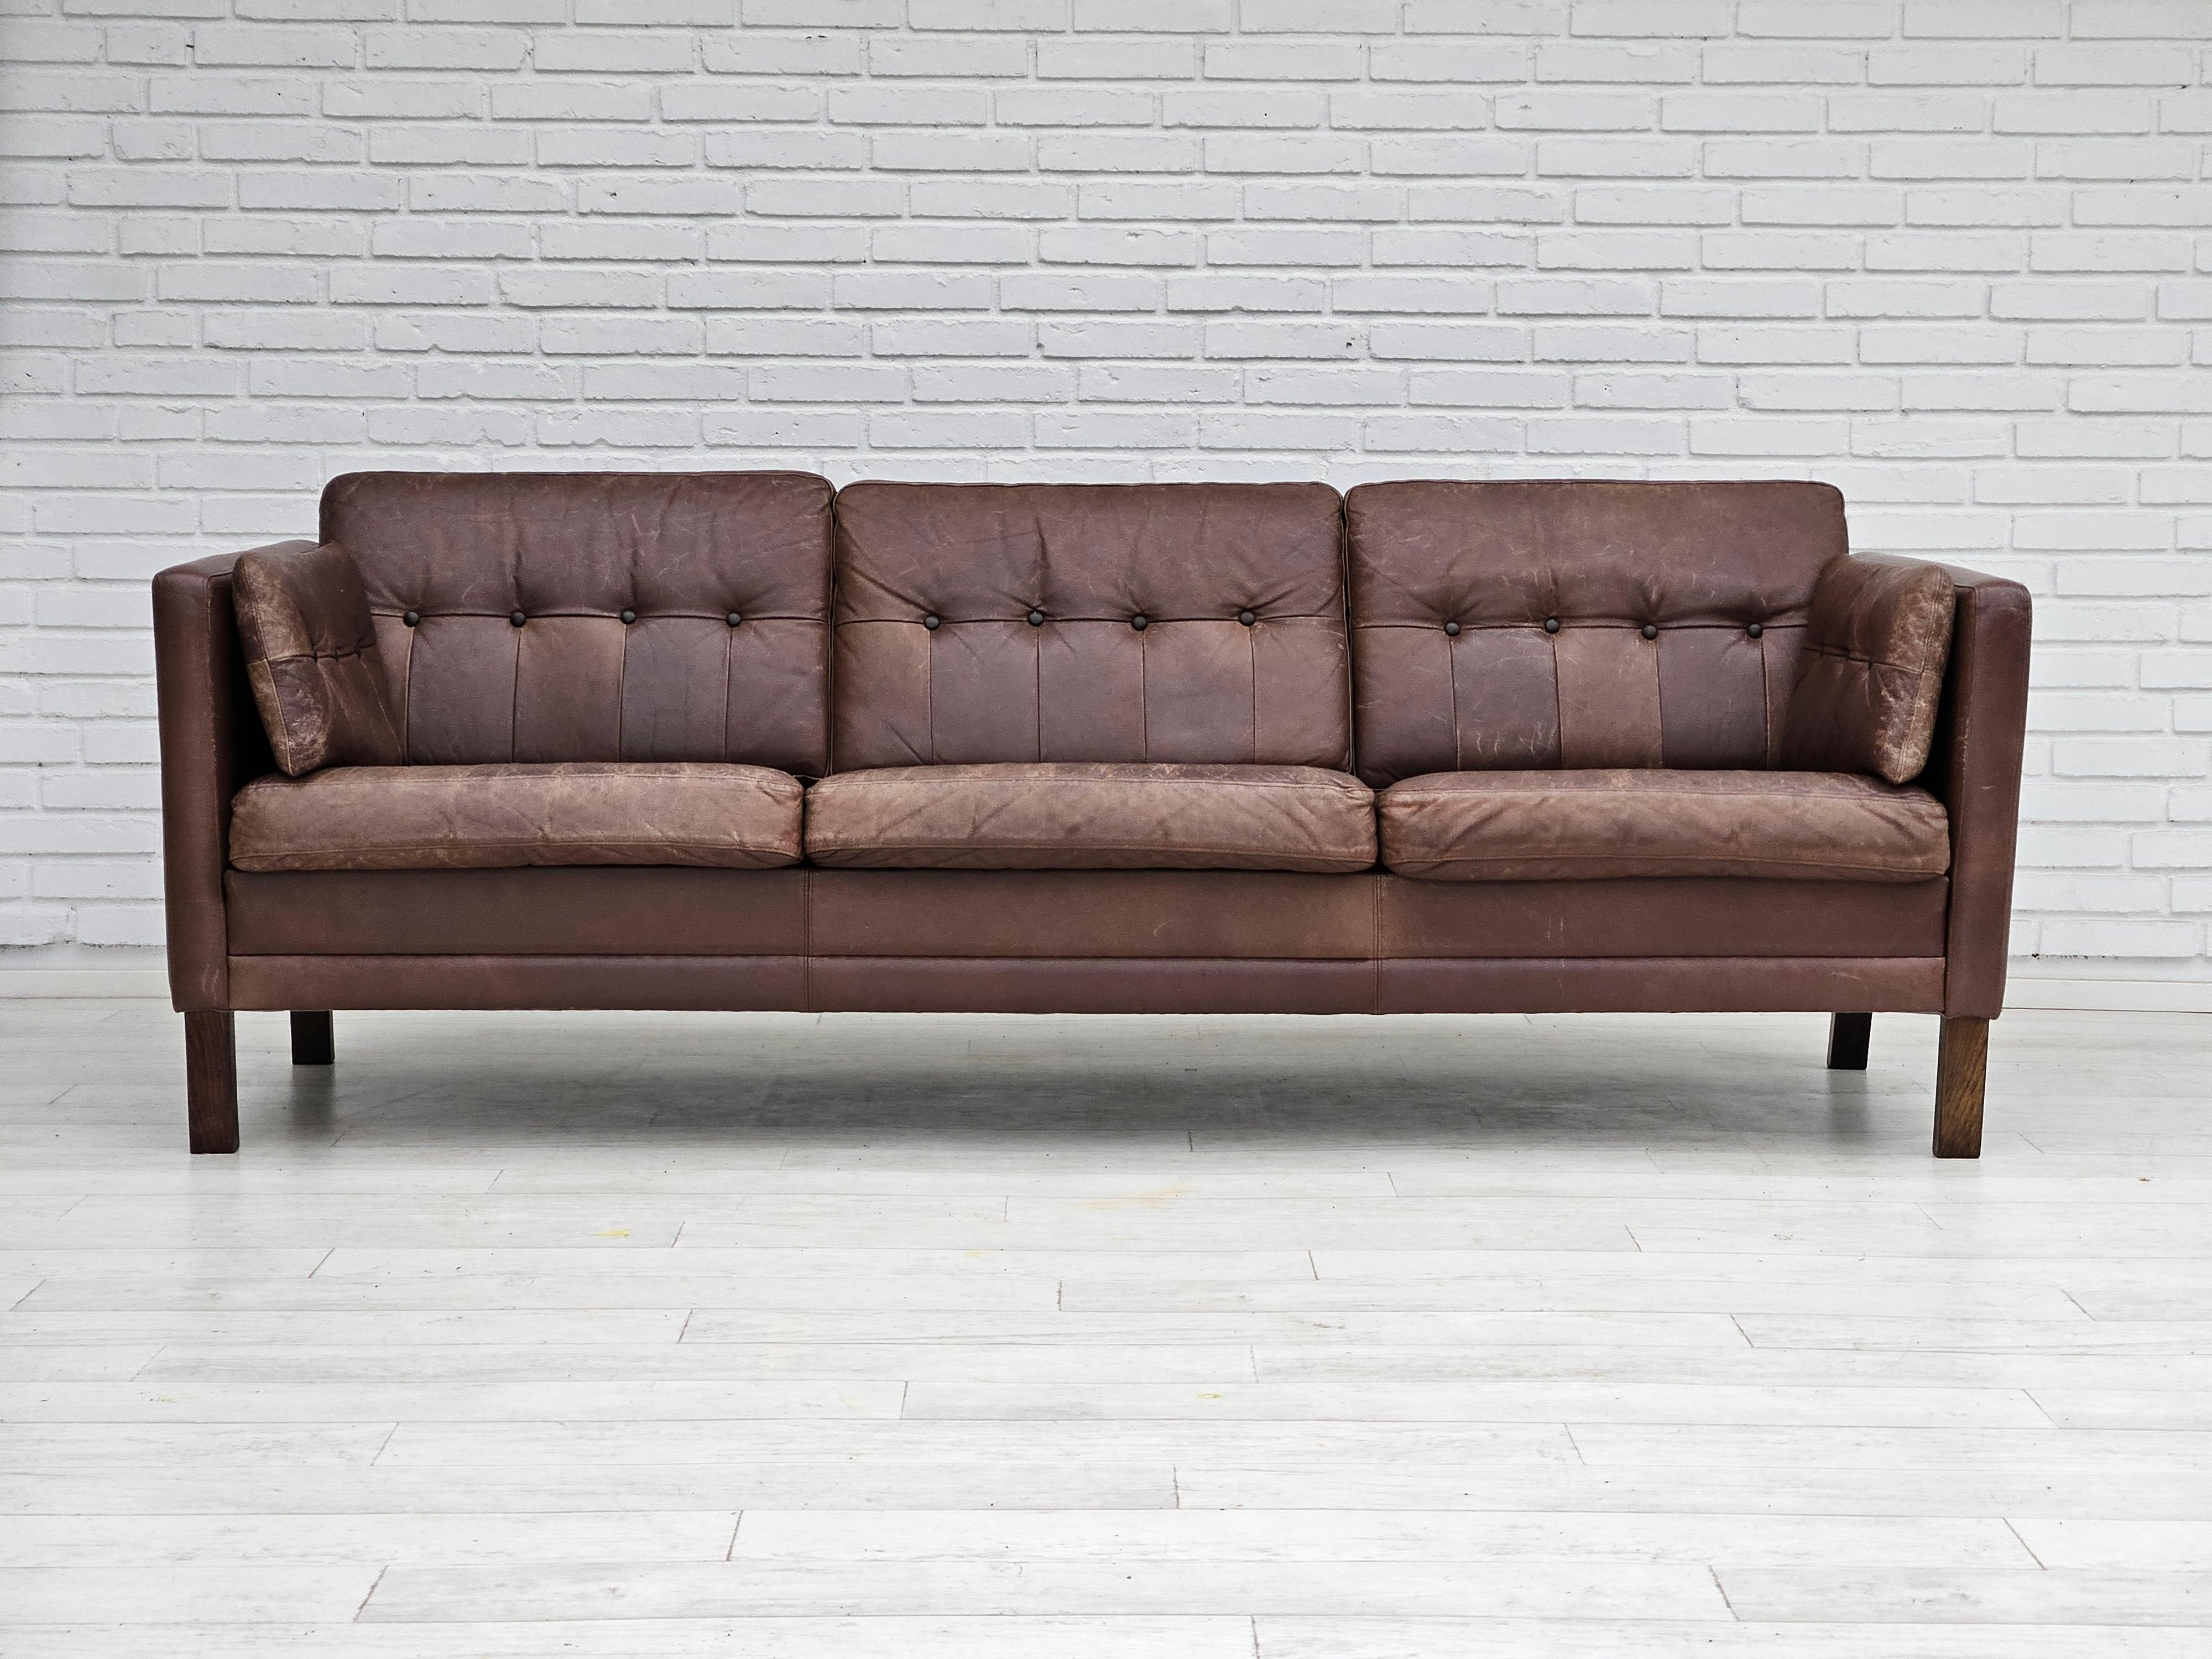 1970s, Danish 3 seater sofa in original good condition: no smells and no stains. Brown leather with nice patina. Beech wood legs. Manufactured by Danish furniture manufacturer in about 1975s. 